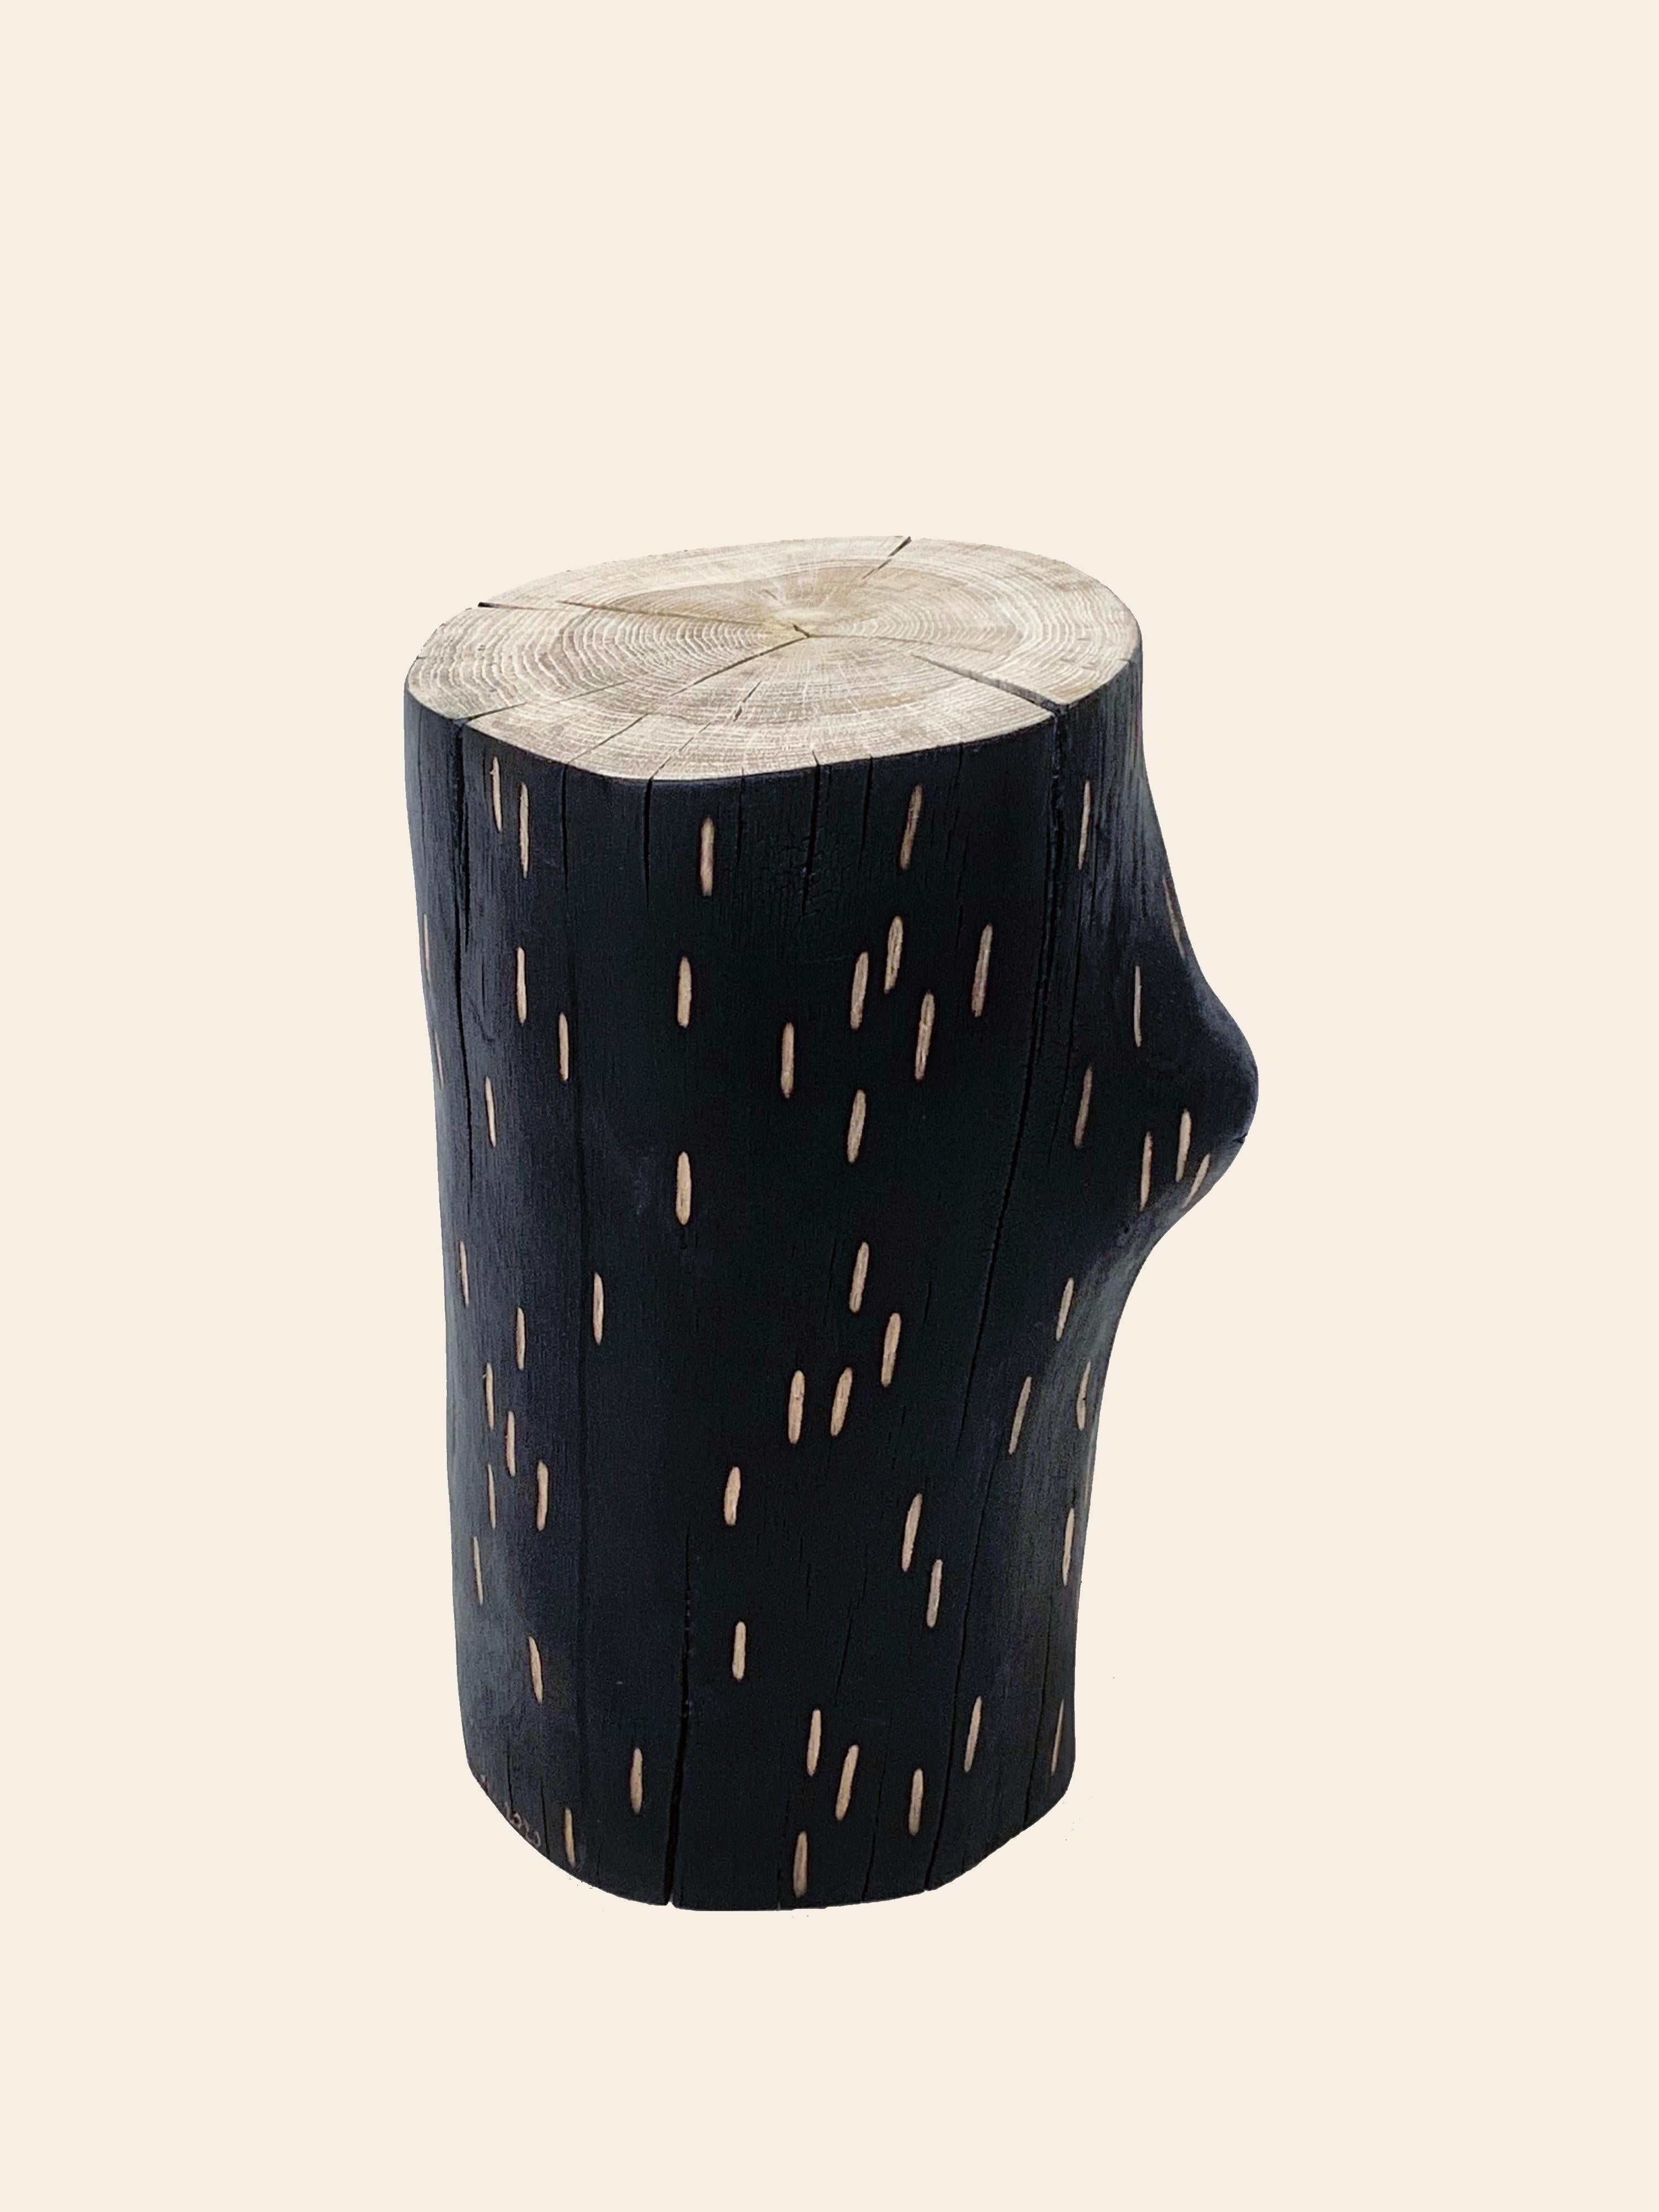 The notched markings found on the bark of a birch tree have been borrowed to make a new coat for this collection, which can be used as a small table or a stool.
We hand pick each individual log section for it’s character. The surface is blackened